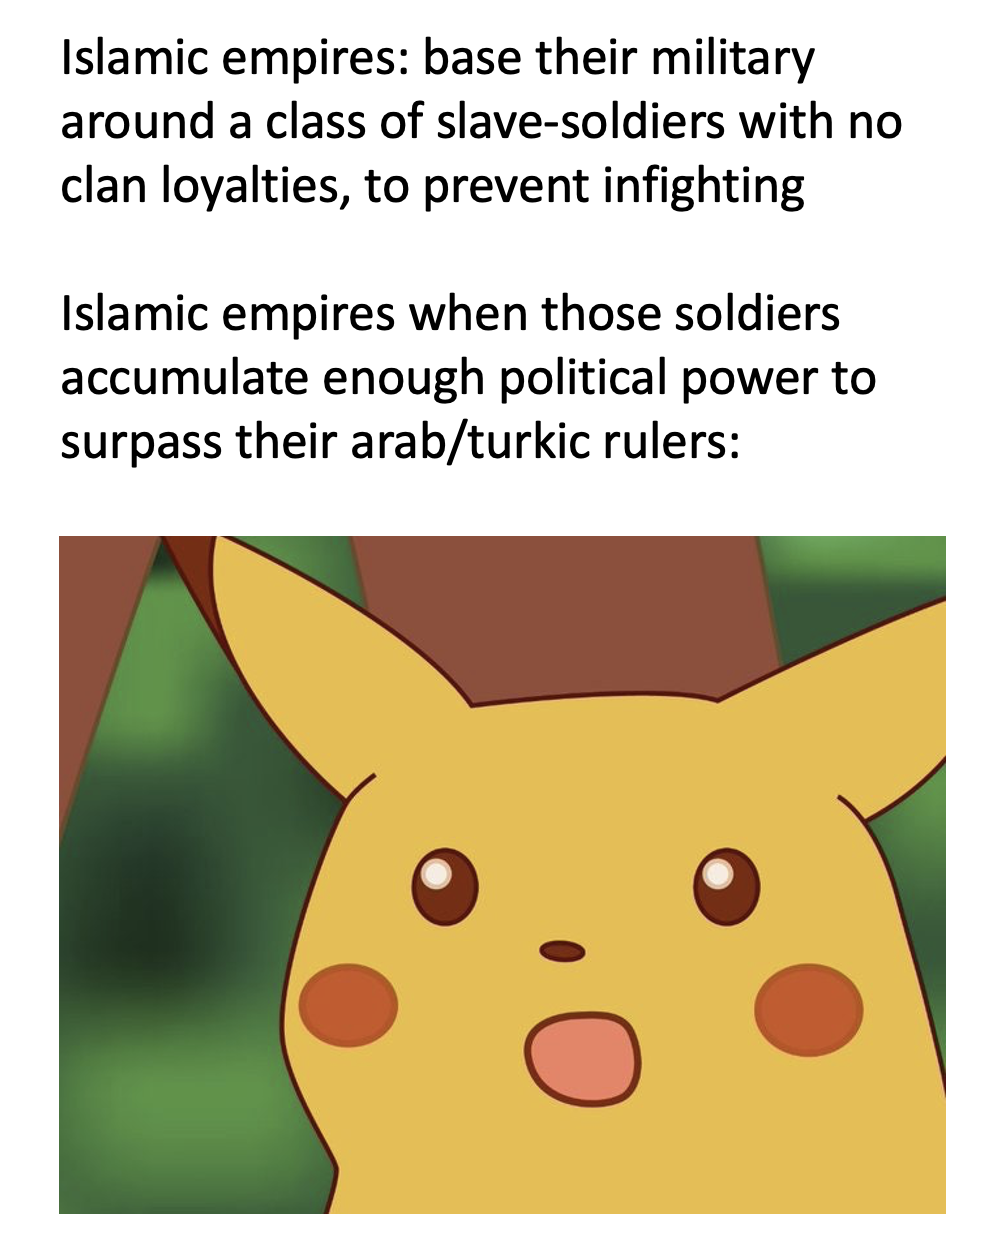 Mamluks and Janissaries playing the long game